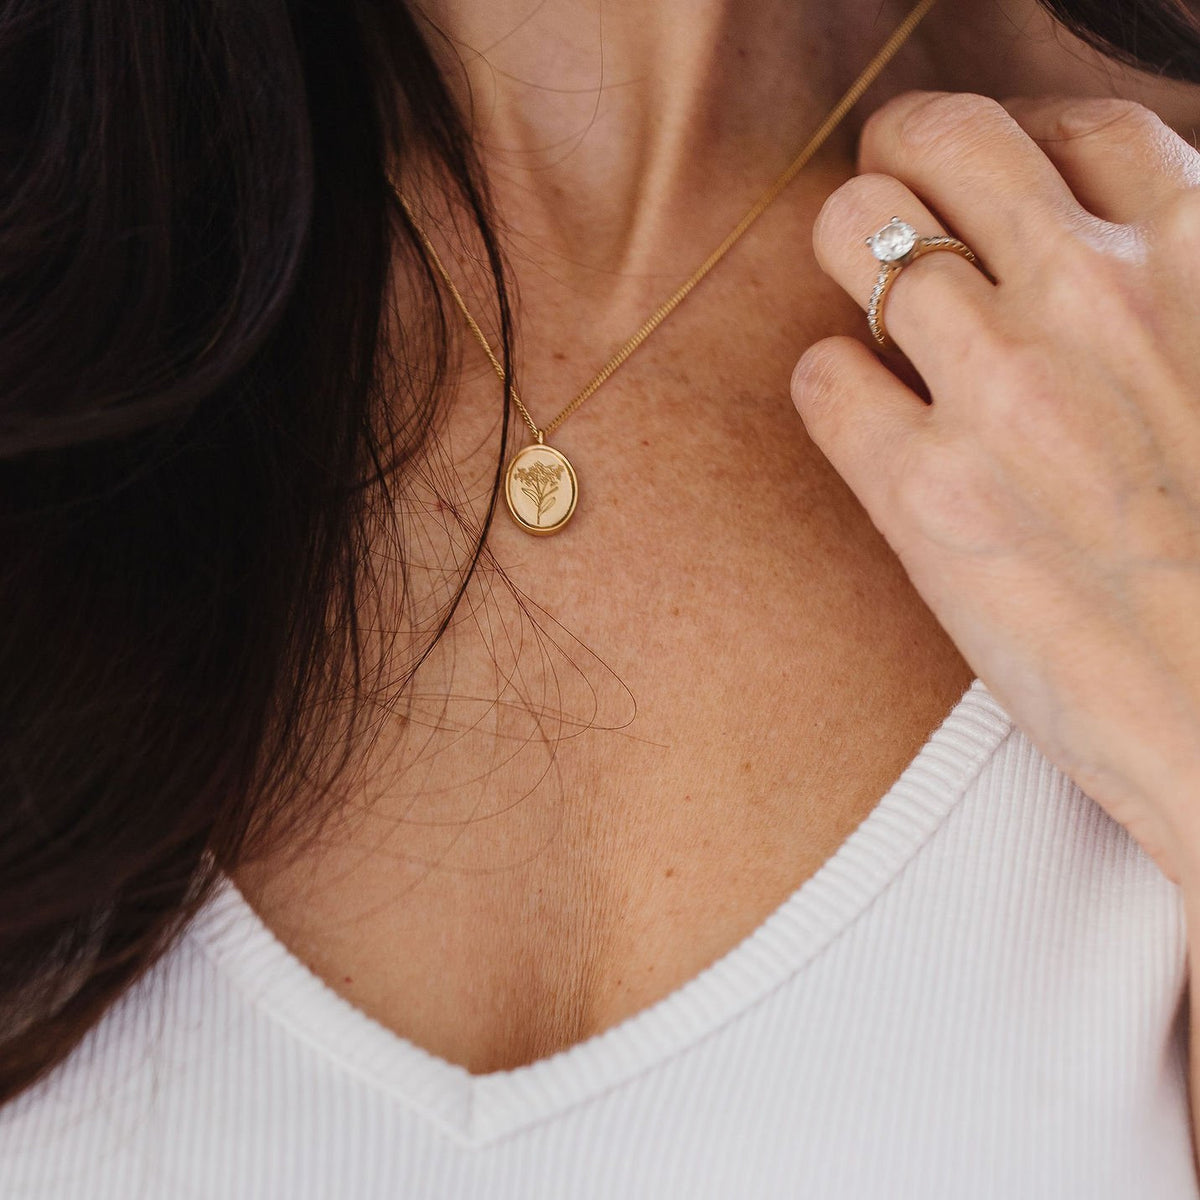 FRAICHE INSPIRE FORGET ME NOT NECKLACE - GOLD - SO PRETTY CARA COTTER